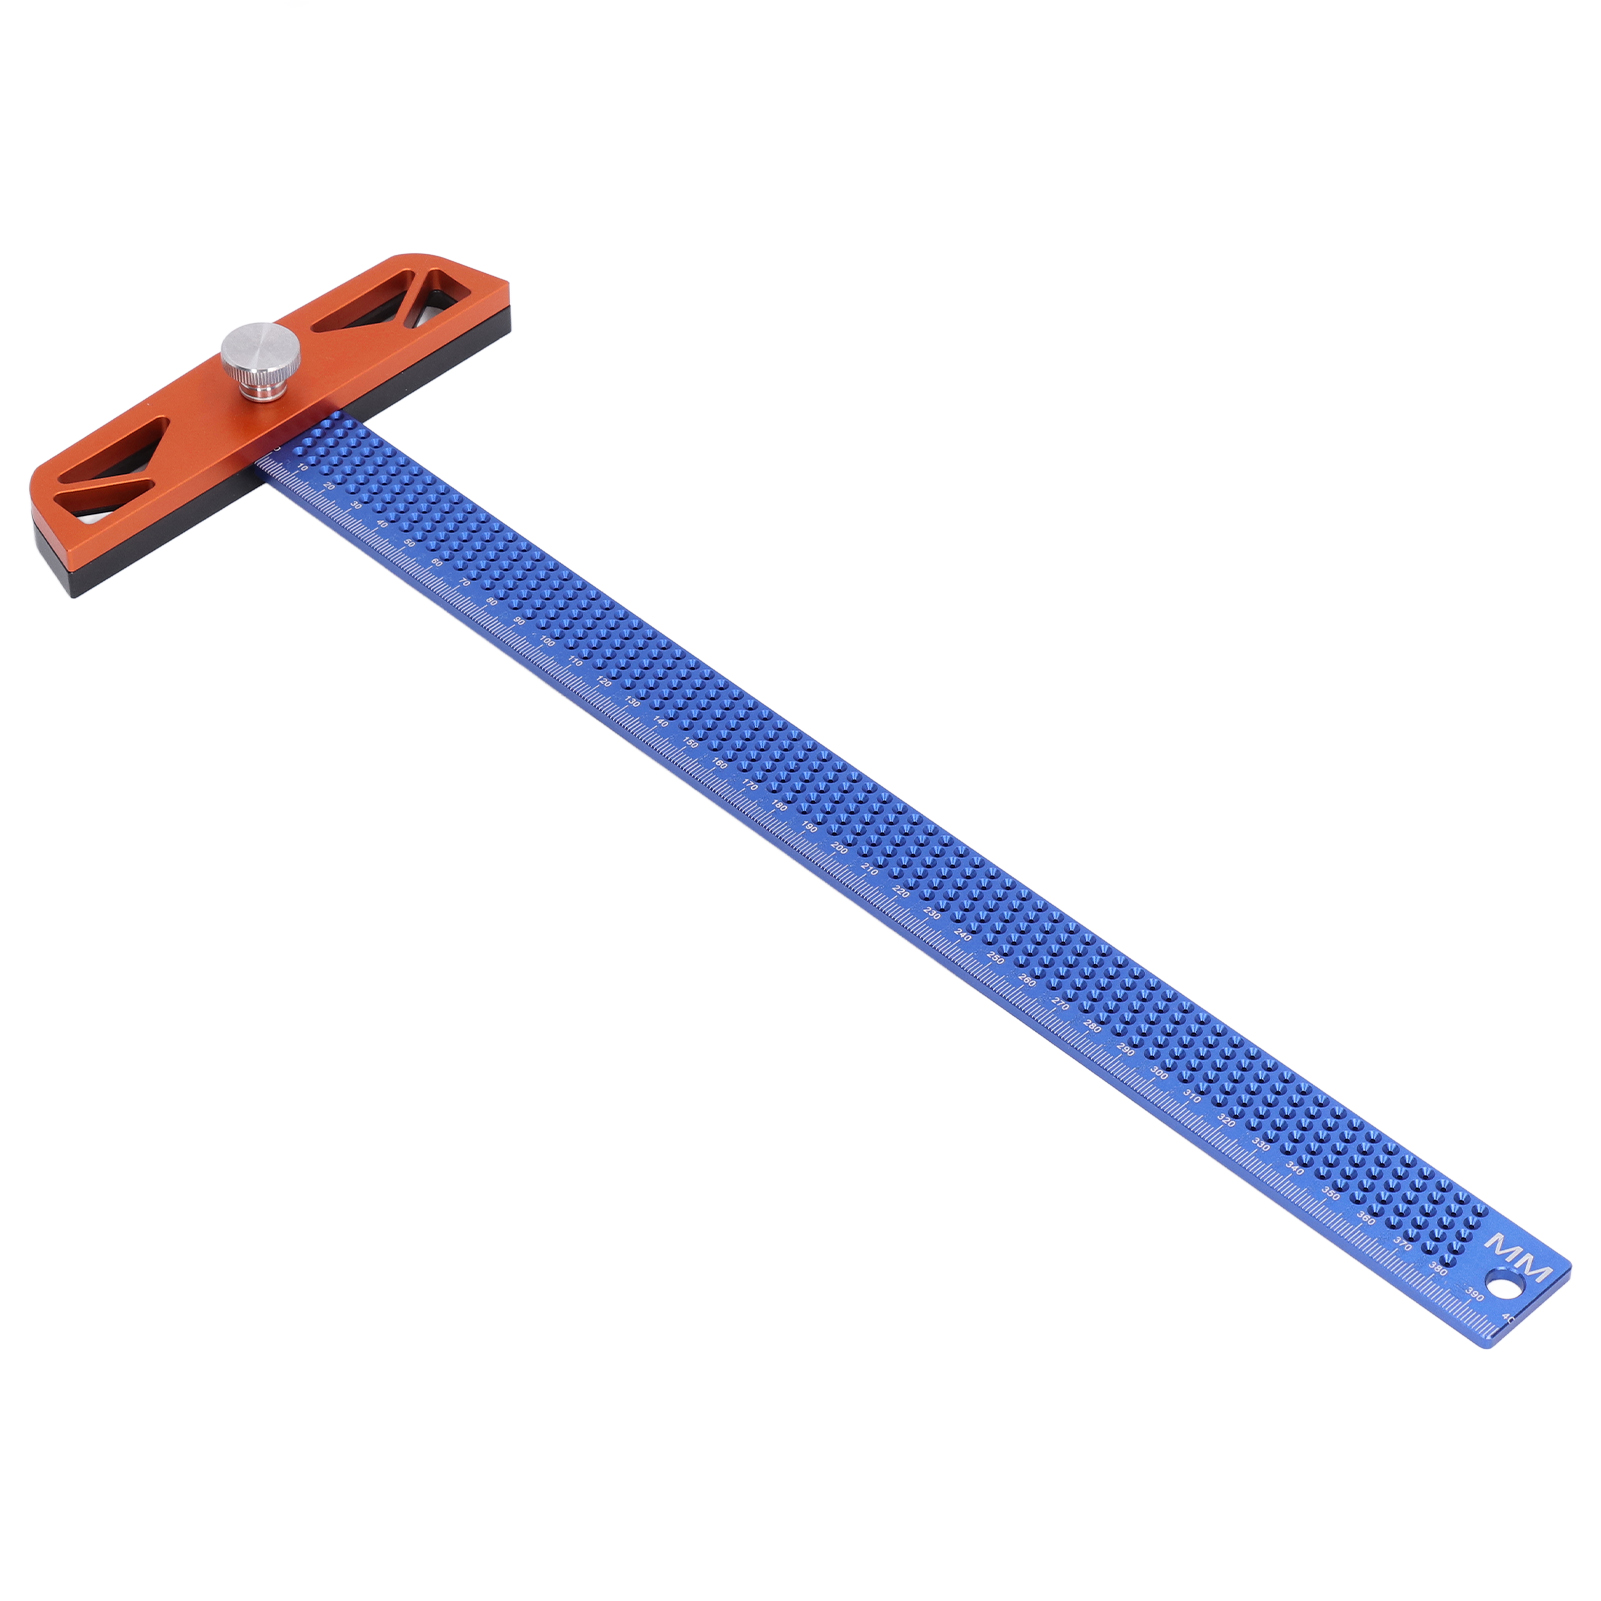 Hole Marking 2 Usable Lengths. Reliable And Stable T-ruler For Woodworking